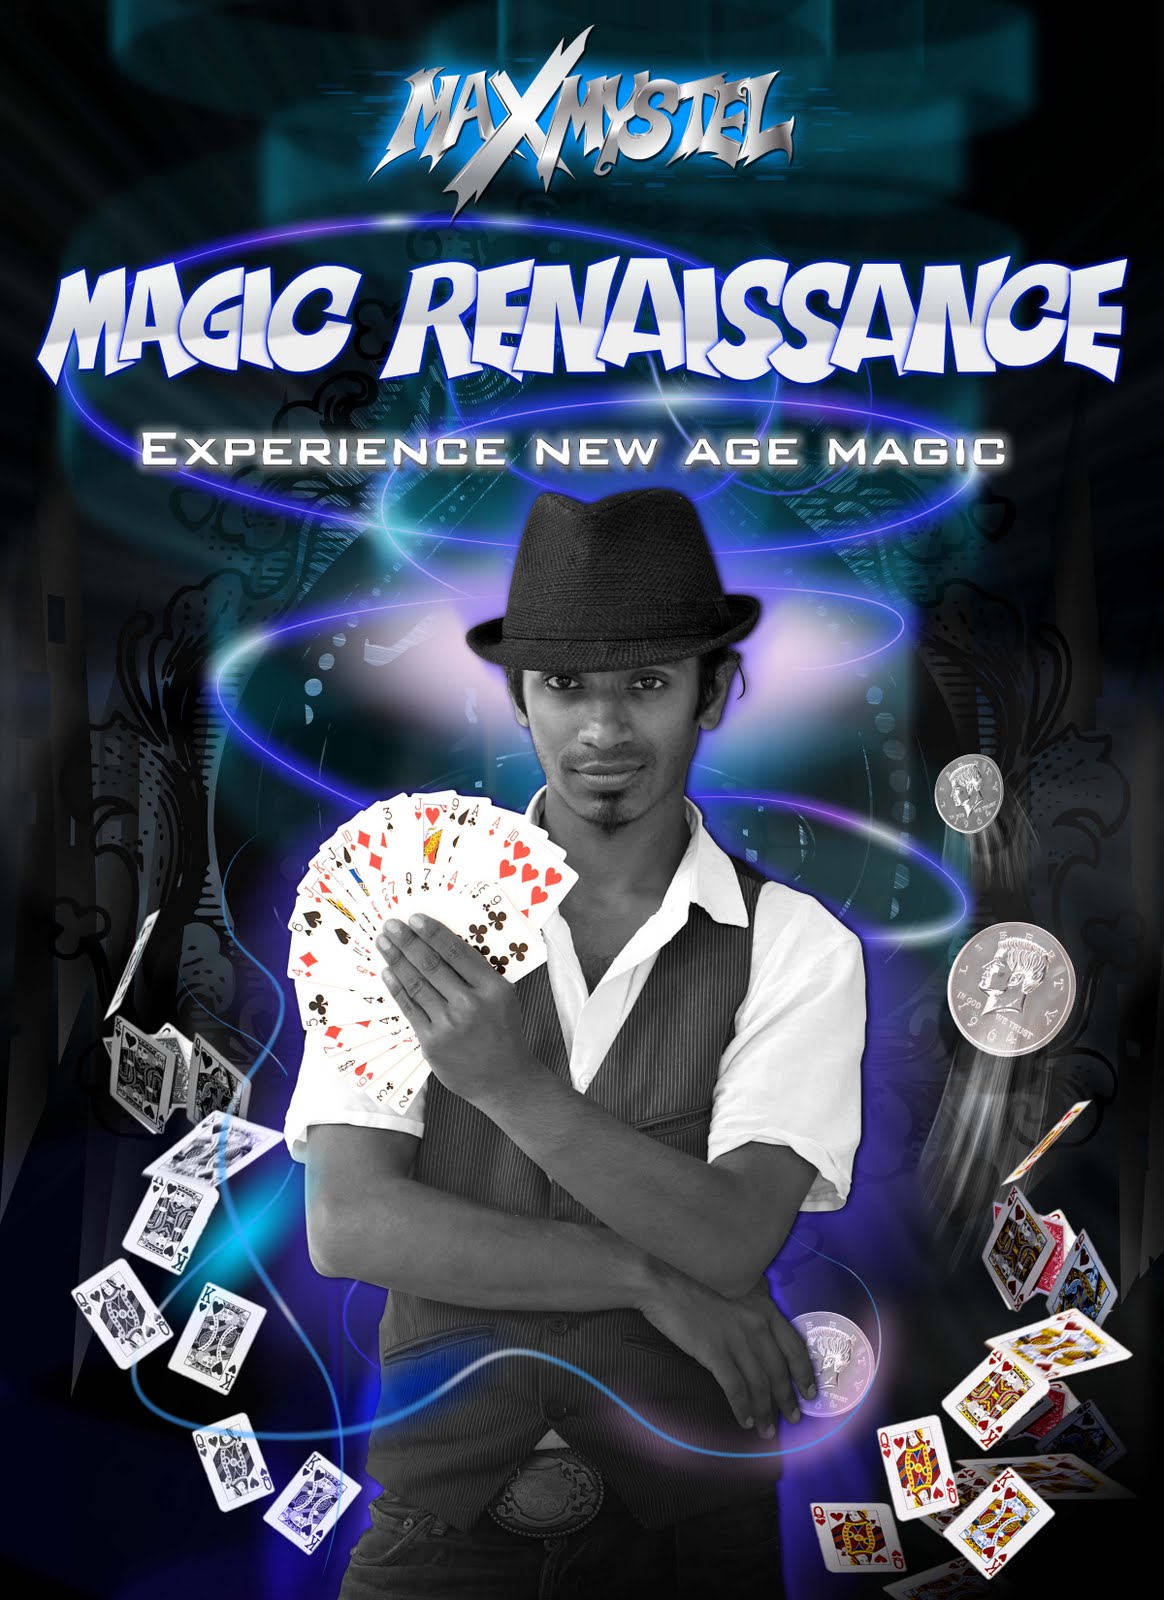 flyers-posters-poster-design-for-magic-show